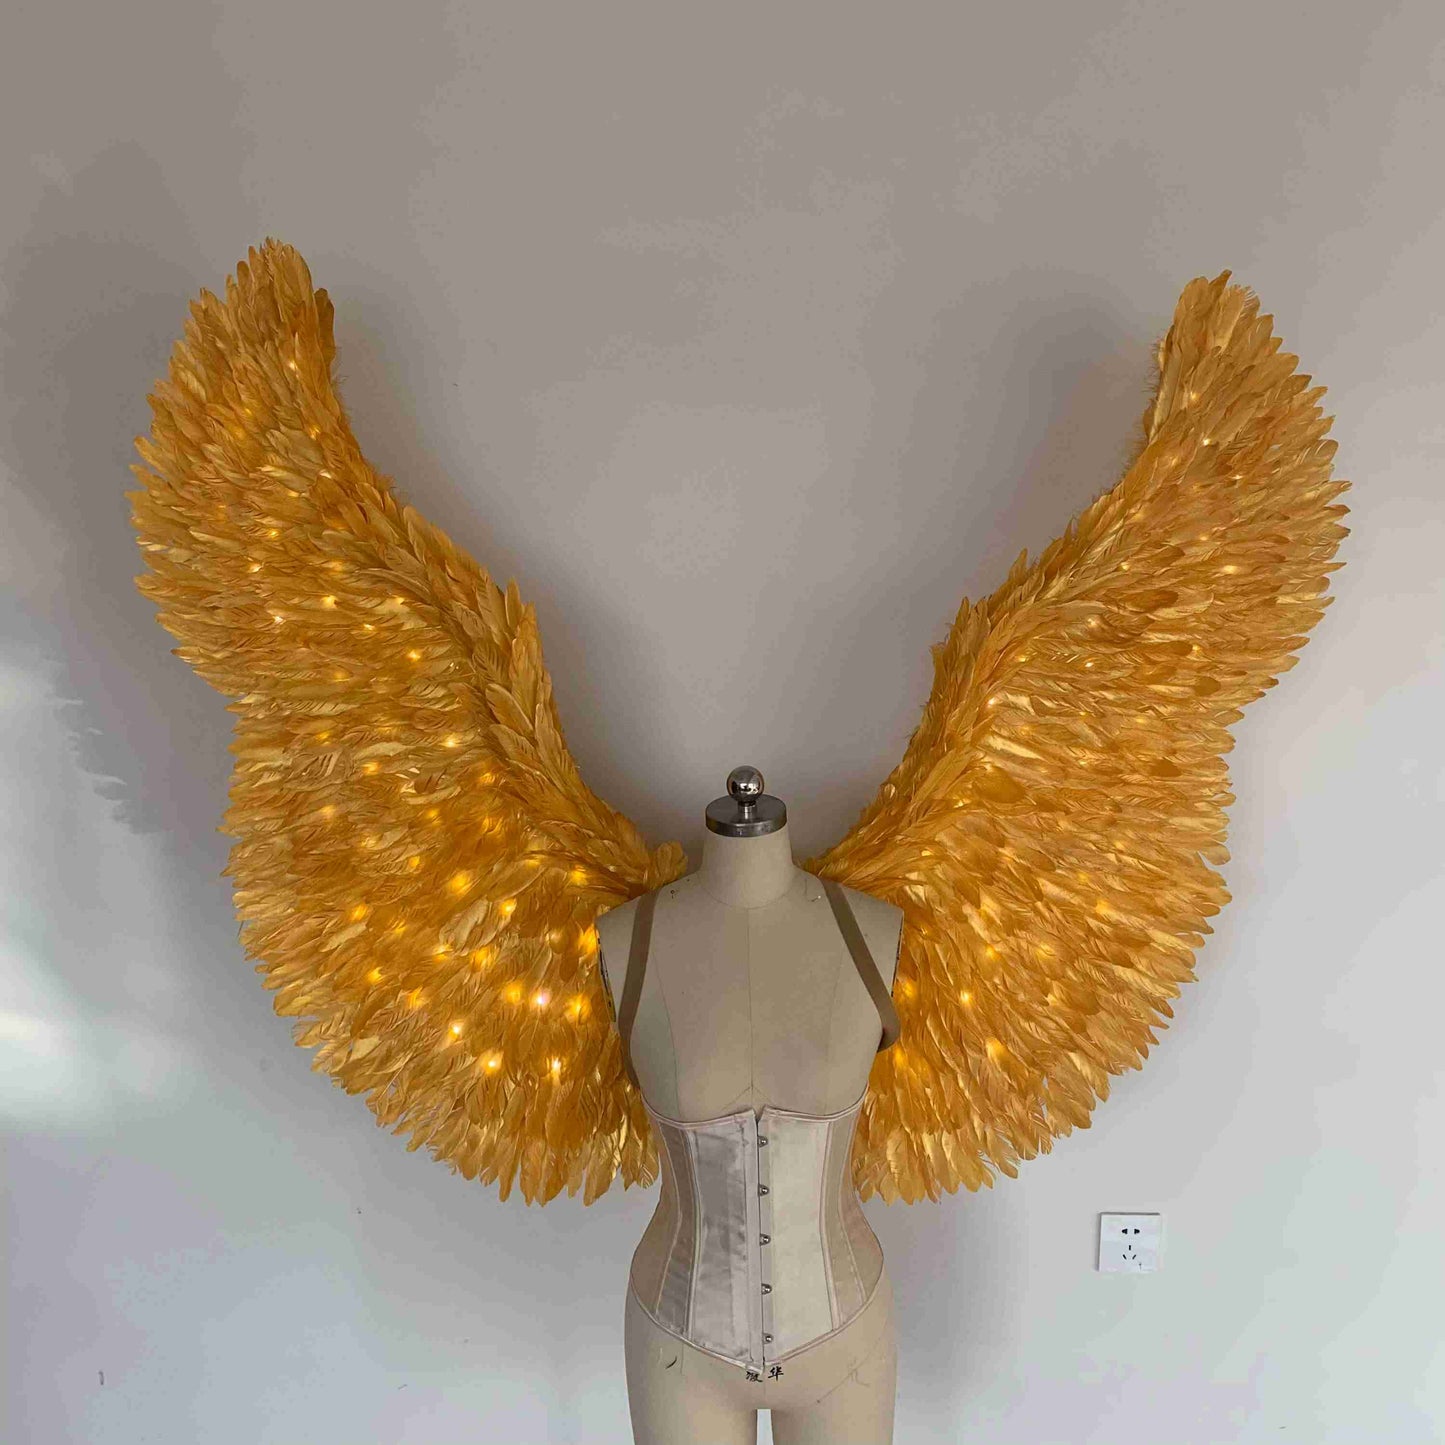 Our gold color angel wings from the front. Made from goose feathers with LED lights inside. Wings for angel costume. Suitable for photoshoots.